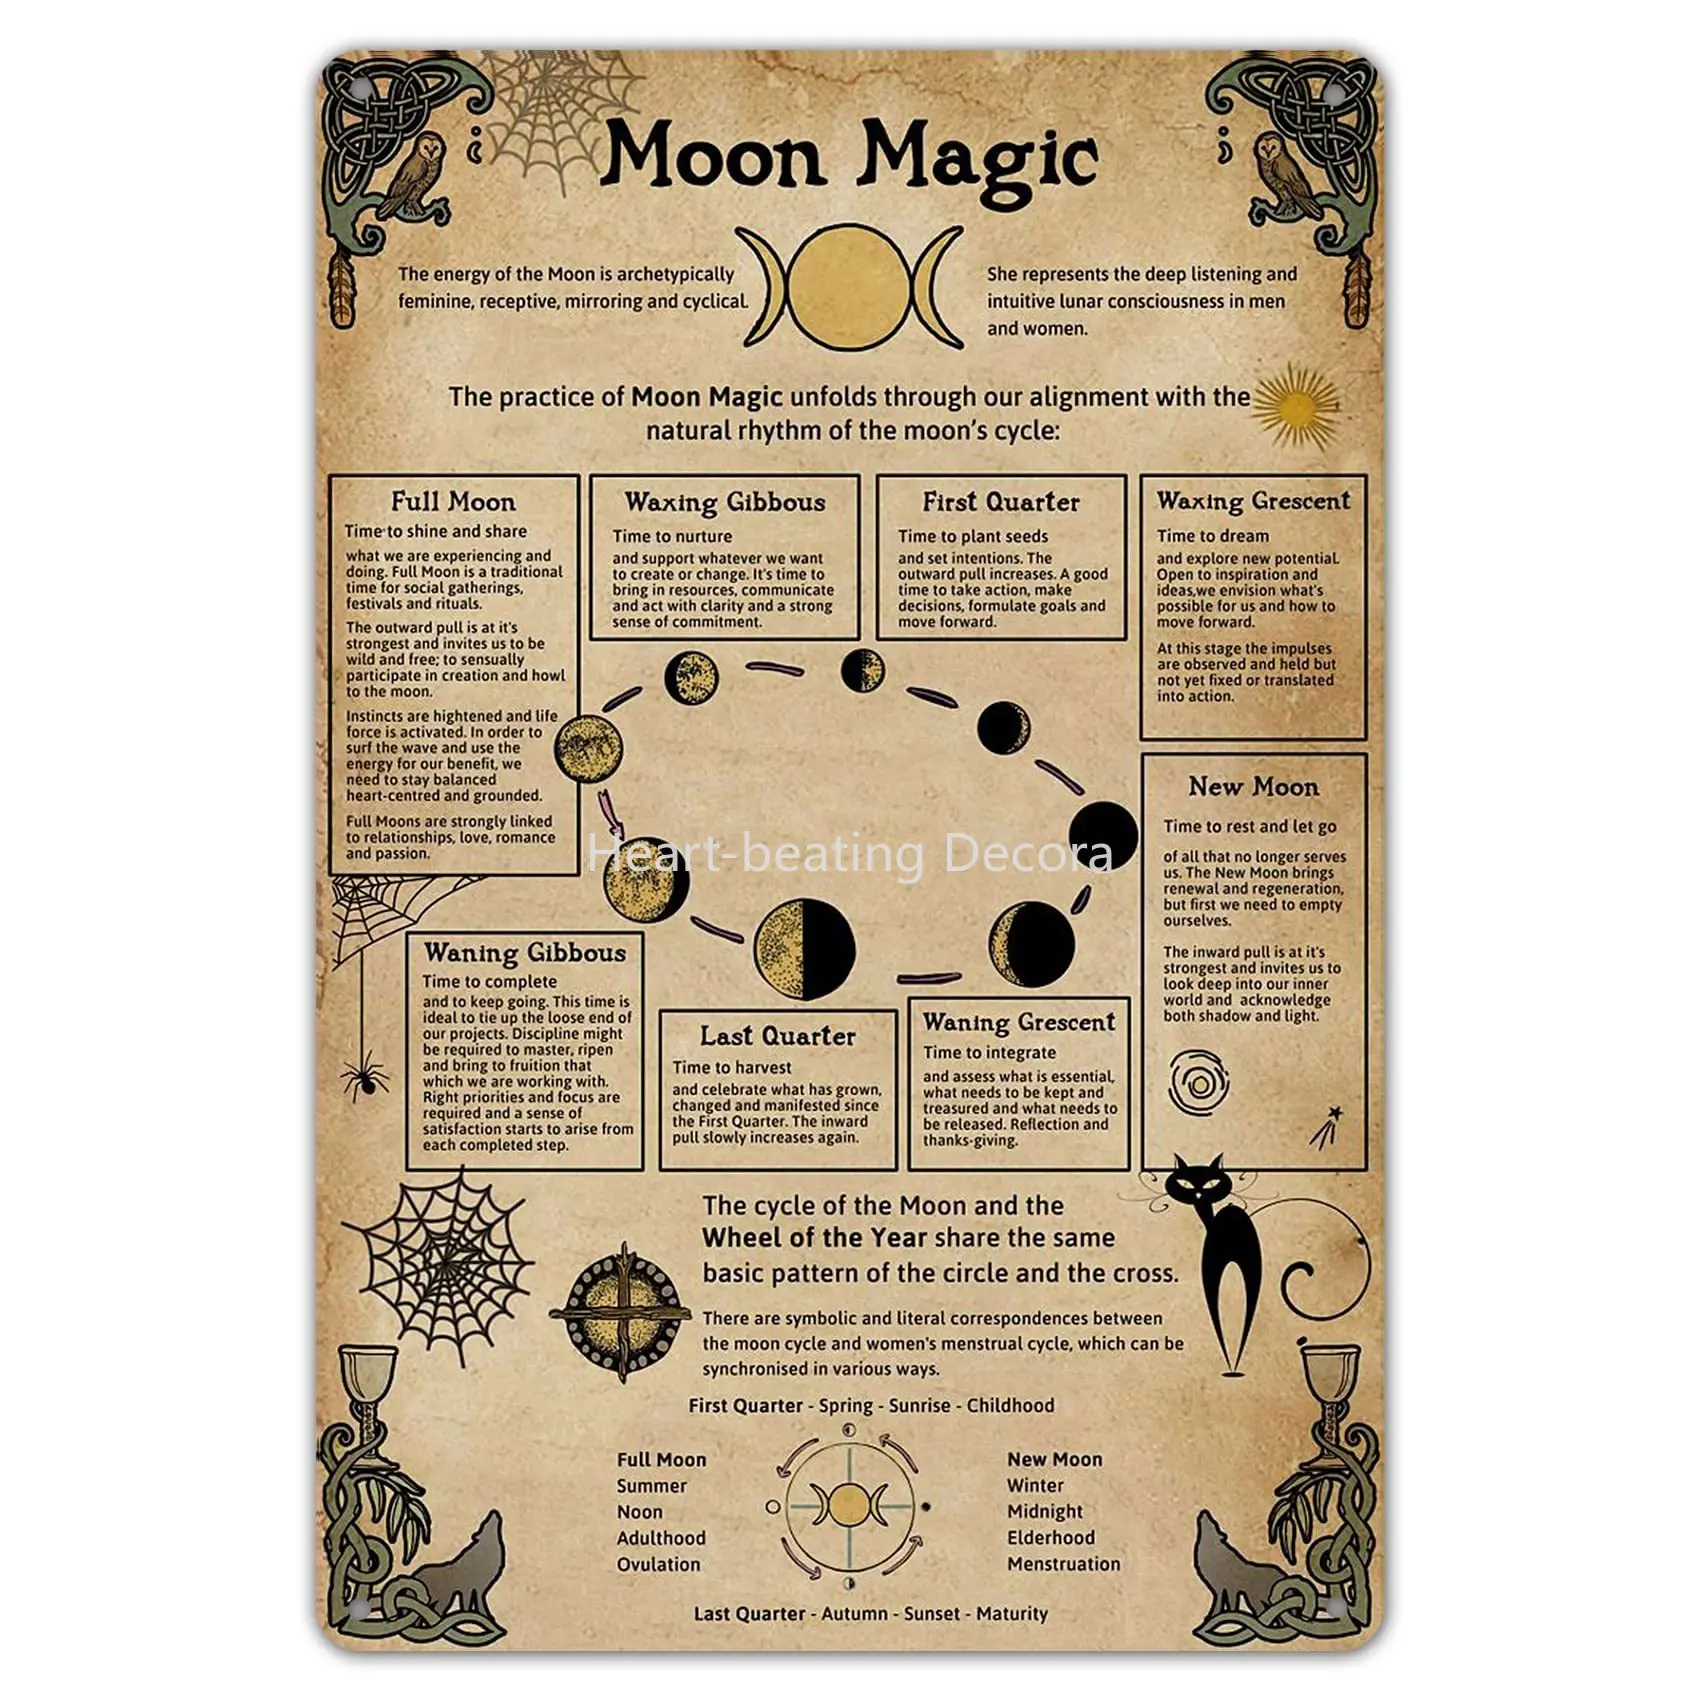 Moon Magic Knowledge Metal Tin Planning Infographic Poster Plaque for School Education Club Home Wall Decor Wall Decor Metal magic black cat with book cool wall decor poster for black cat lover wall art decoration metal plaque poster metal sign